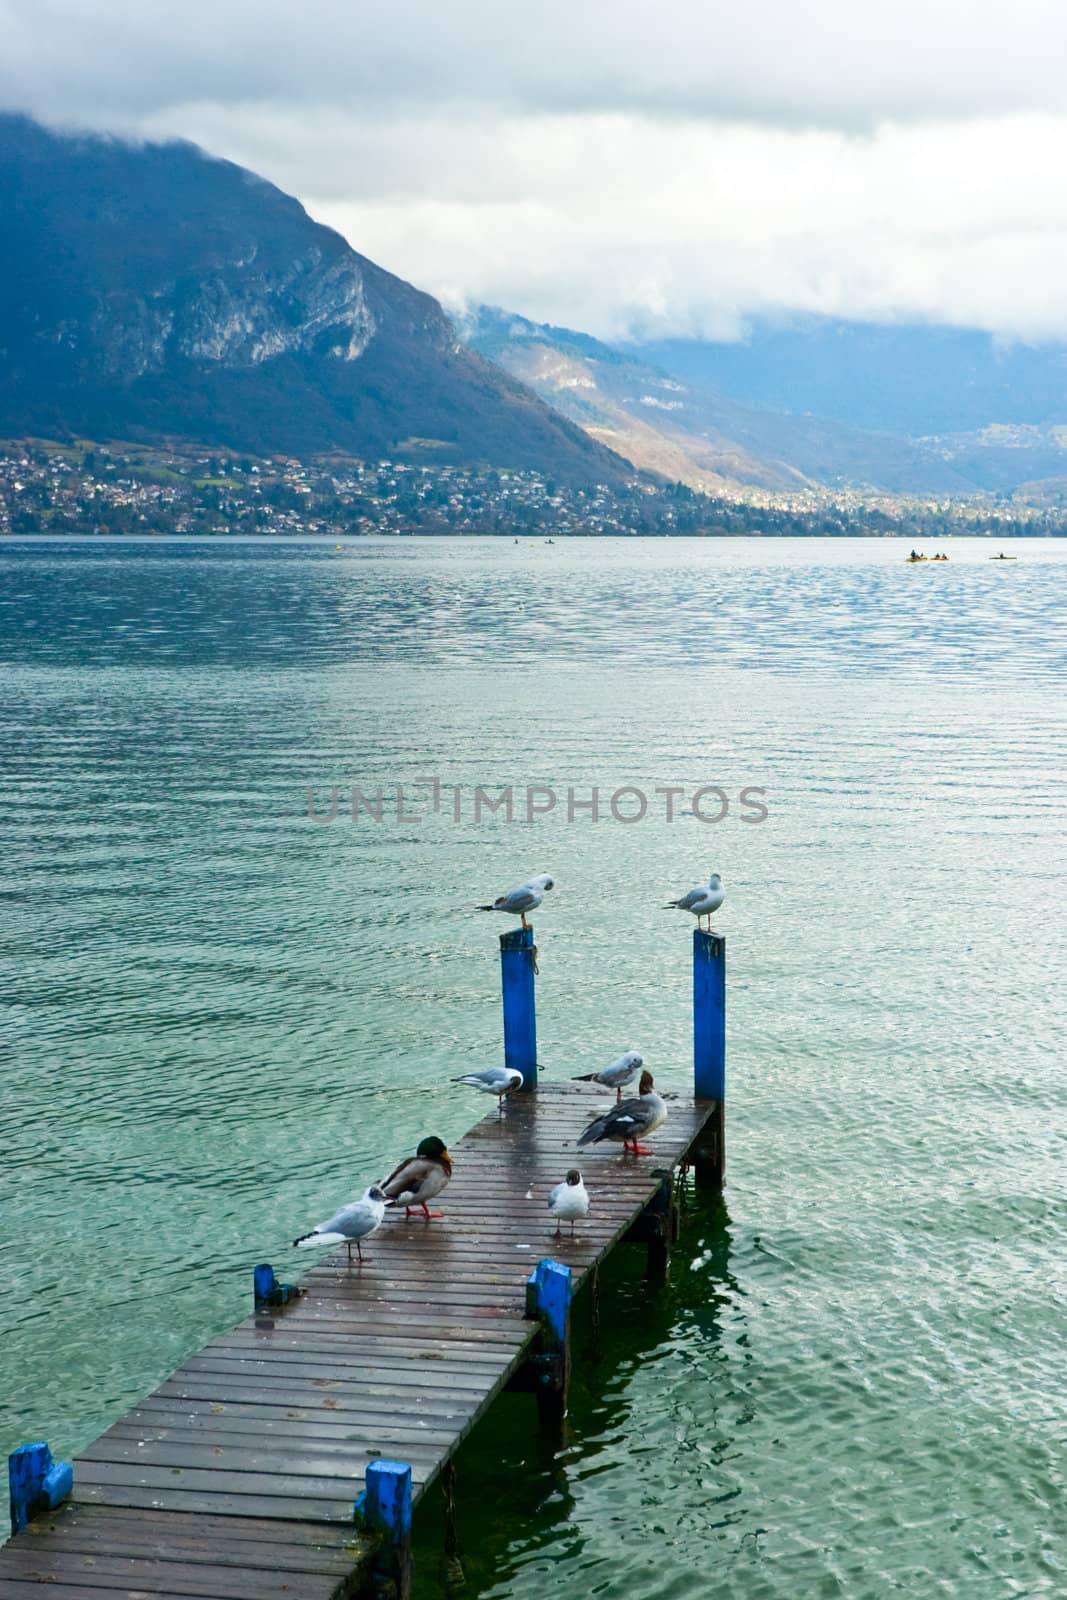 Lake Annecy by naumoid